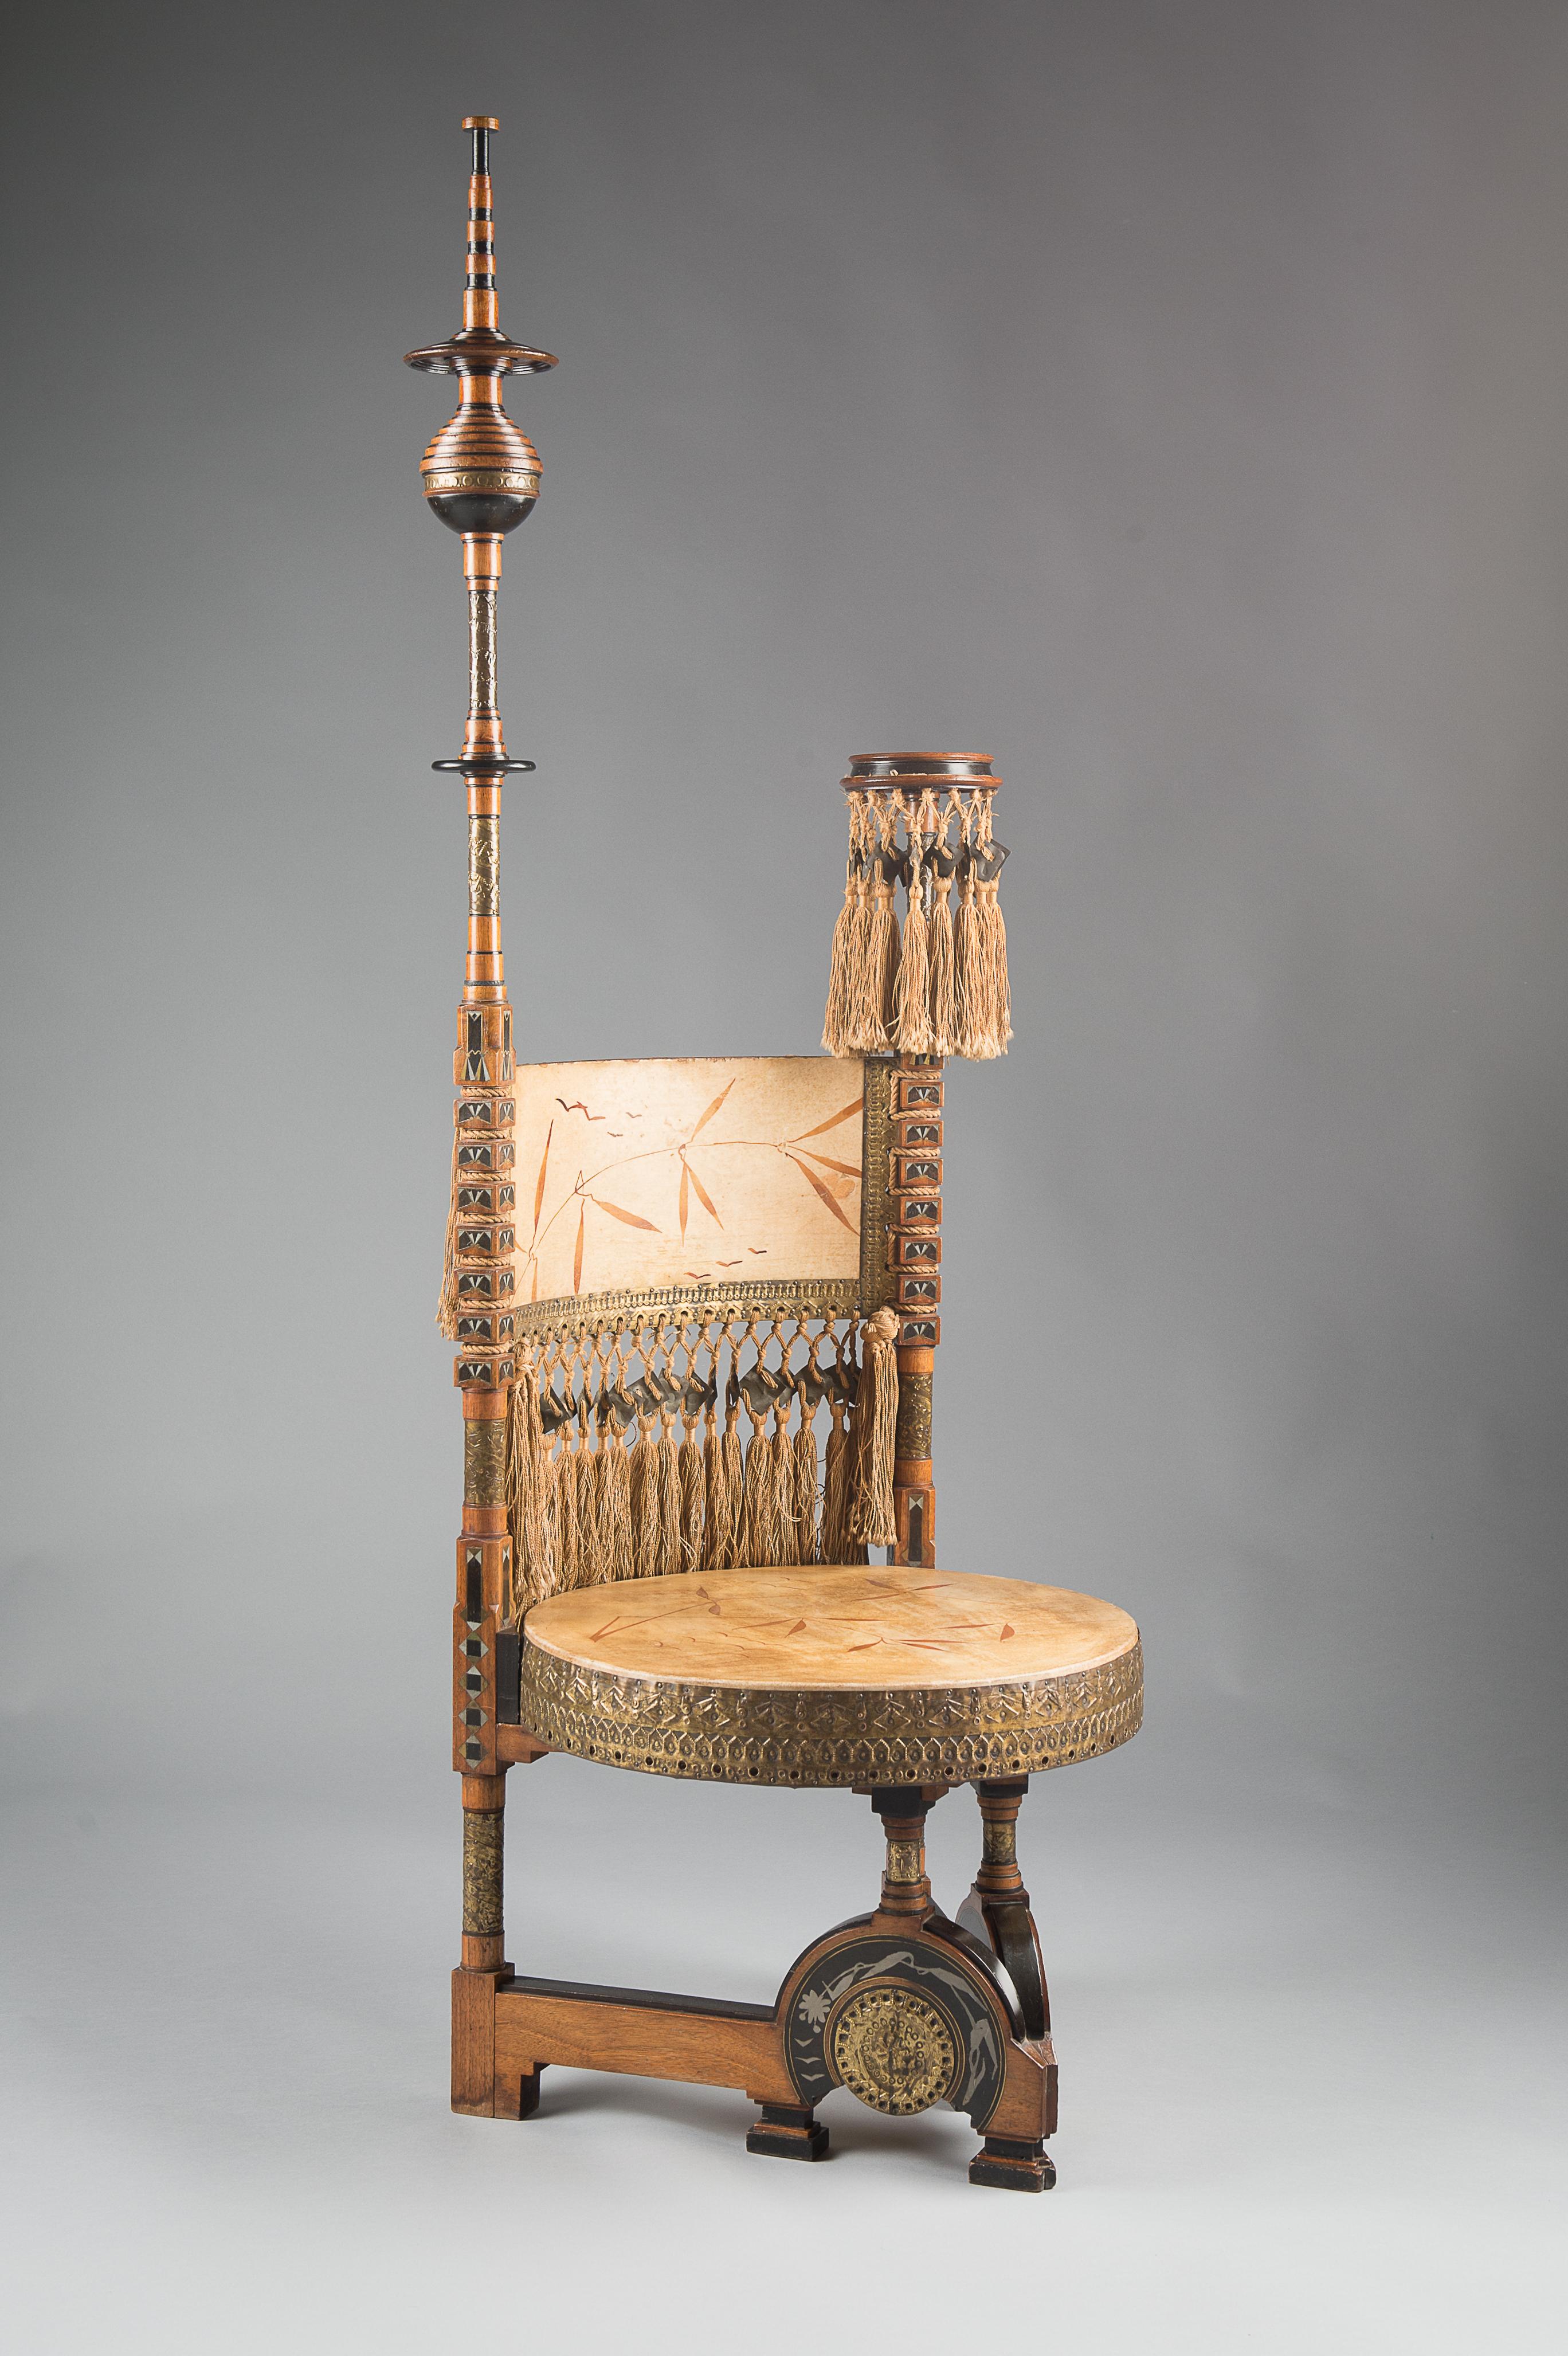 An important circular seated walnut throne chair. Consisting of calf vellum seat and hand painted illumination, inlaid with Pewter and Brass and applied hand beaten copper. Original silk tassels and an original Bugatti label from Milan.
Featured in